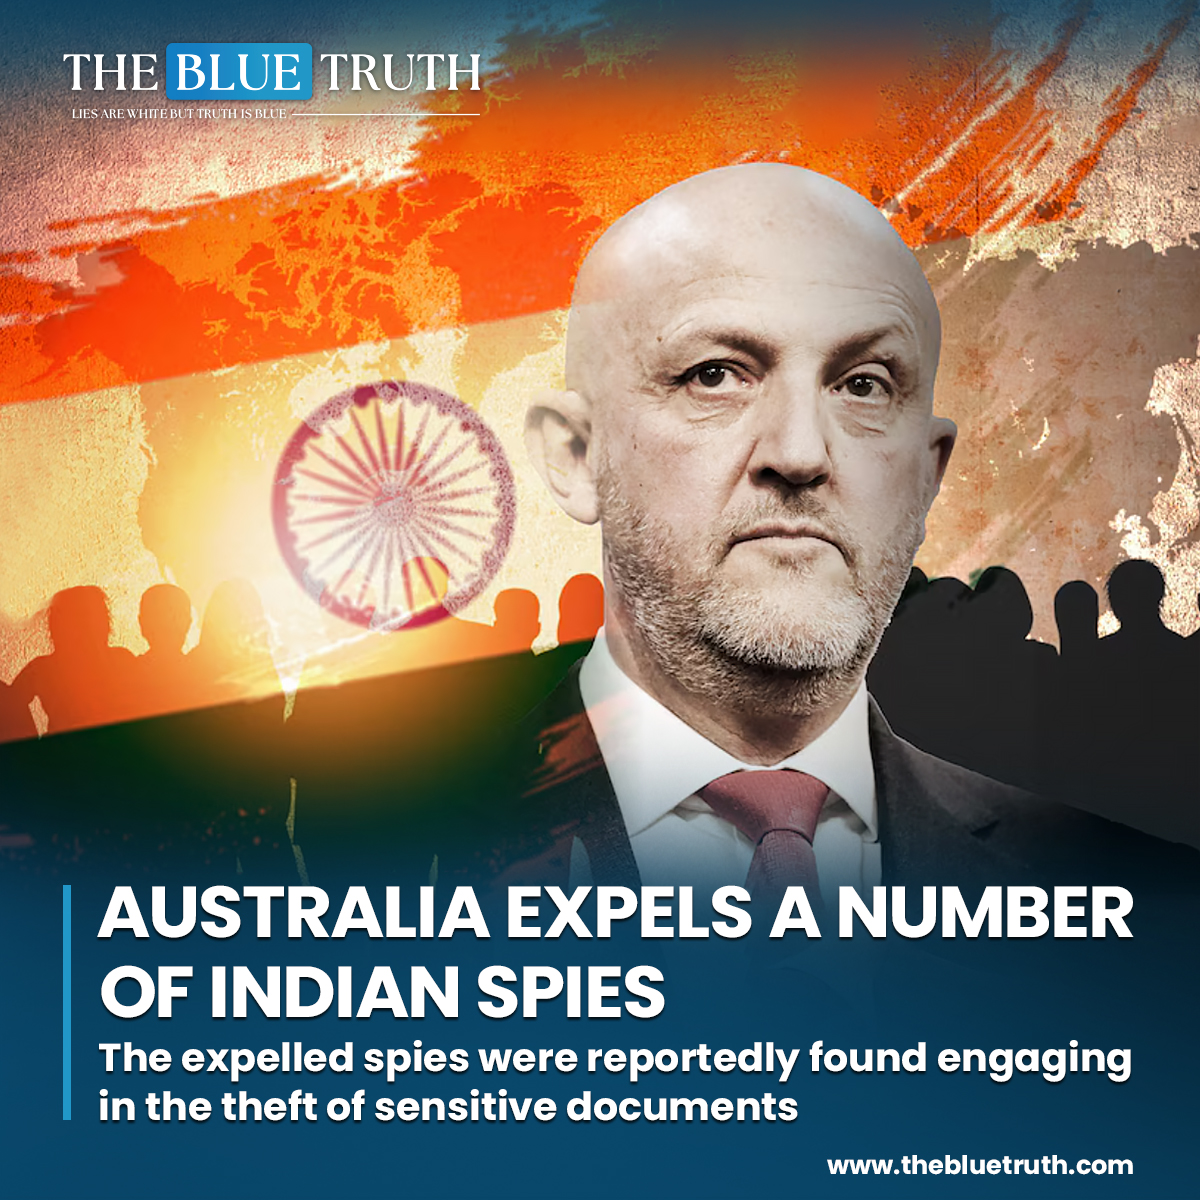 Reports suggest that the expulsion was part of a broader effort to counter Indian espionage activities on Australian soil.
#Australia #IndianSpies #Espionage #ForeignInterference #RAW #ASIO #TBT #TheBlueTruth